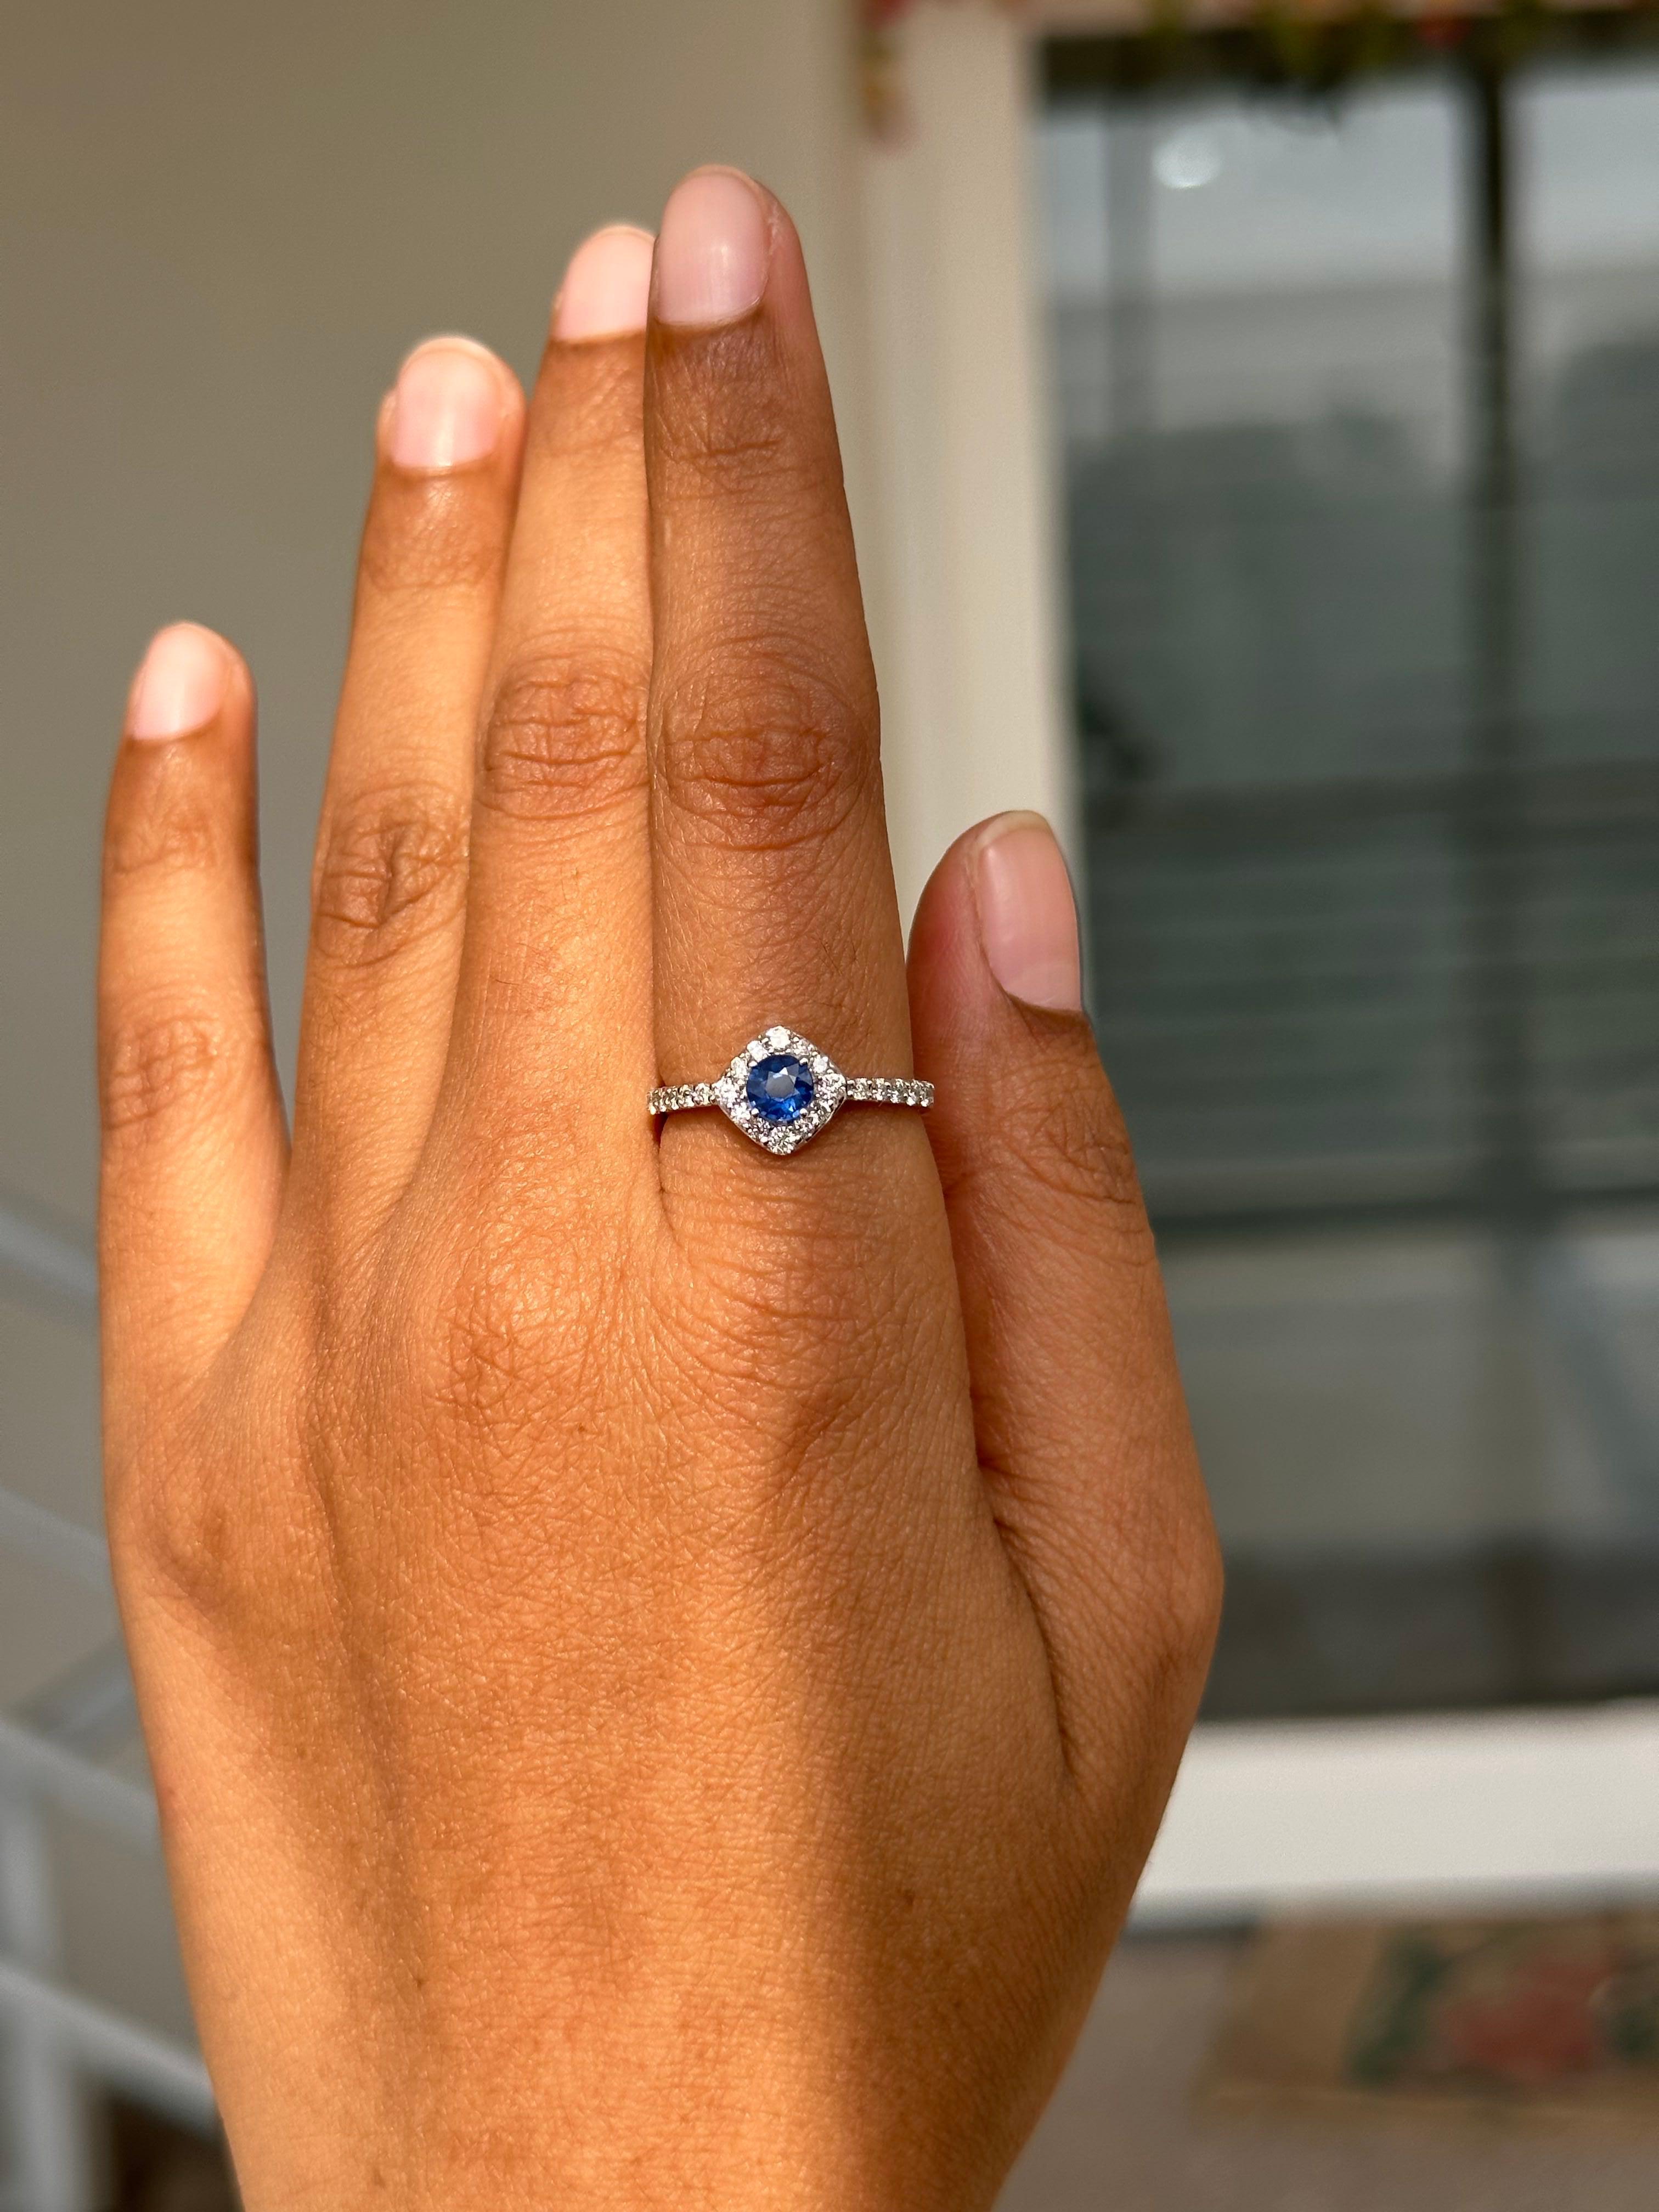 For Sale:  Royal Blue Sapphire with Halo Diamond Ring Crafted in Solid 14k White Gold 9